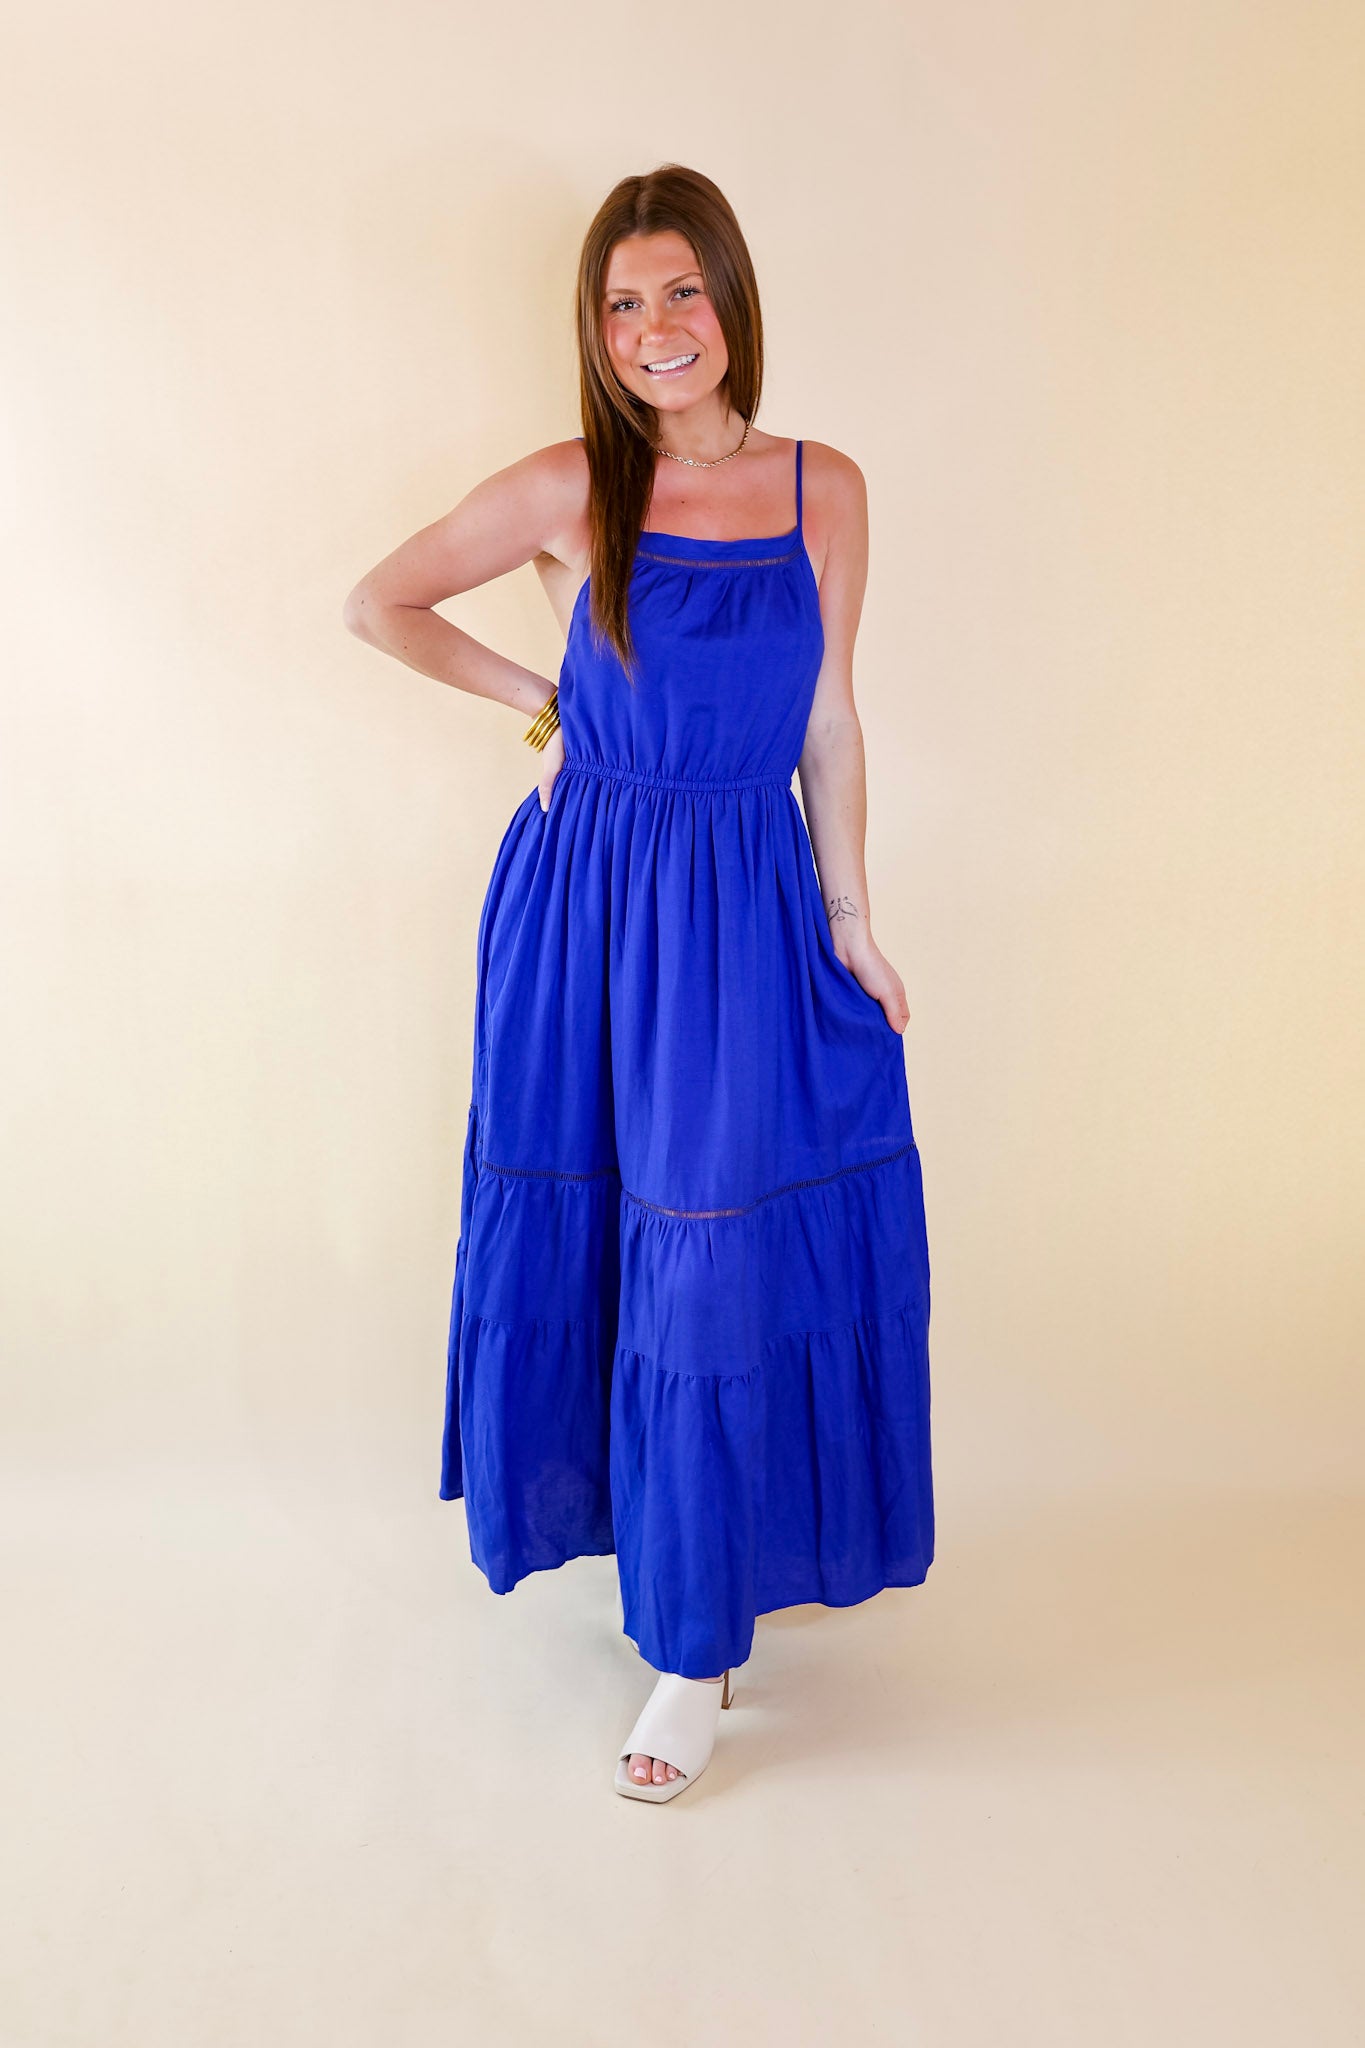 Tranquil Tides Tiered Maxi Dress in Royal Blue - Giddy Up Glamour Boutique